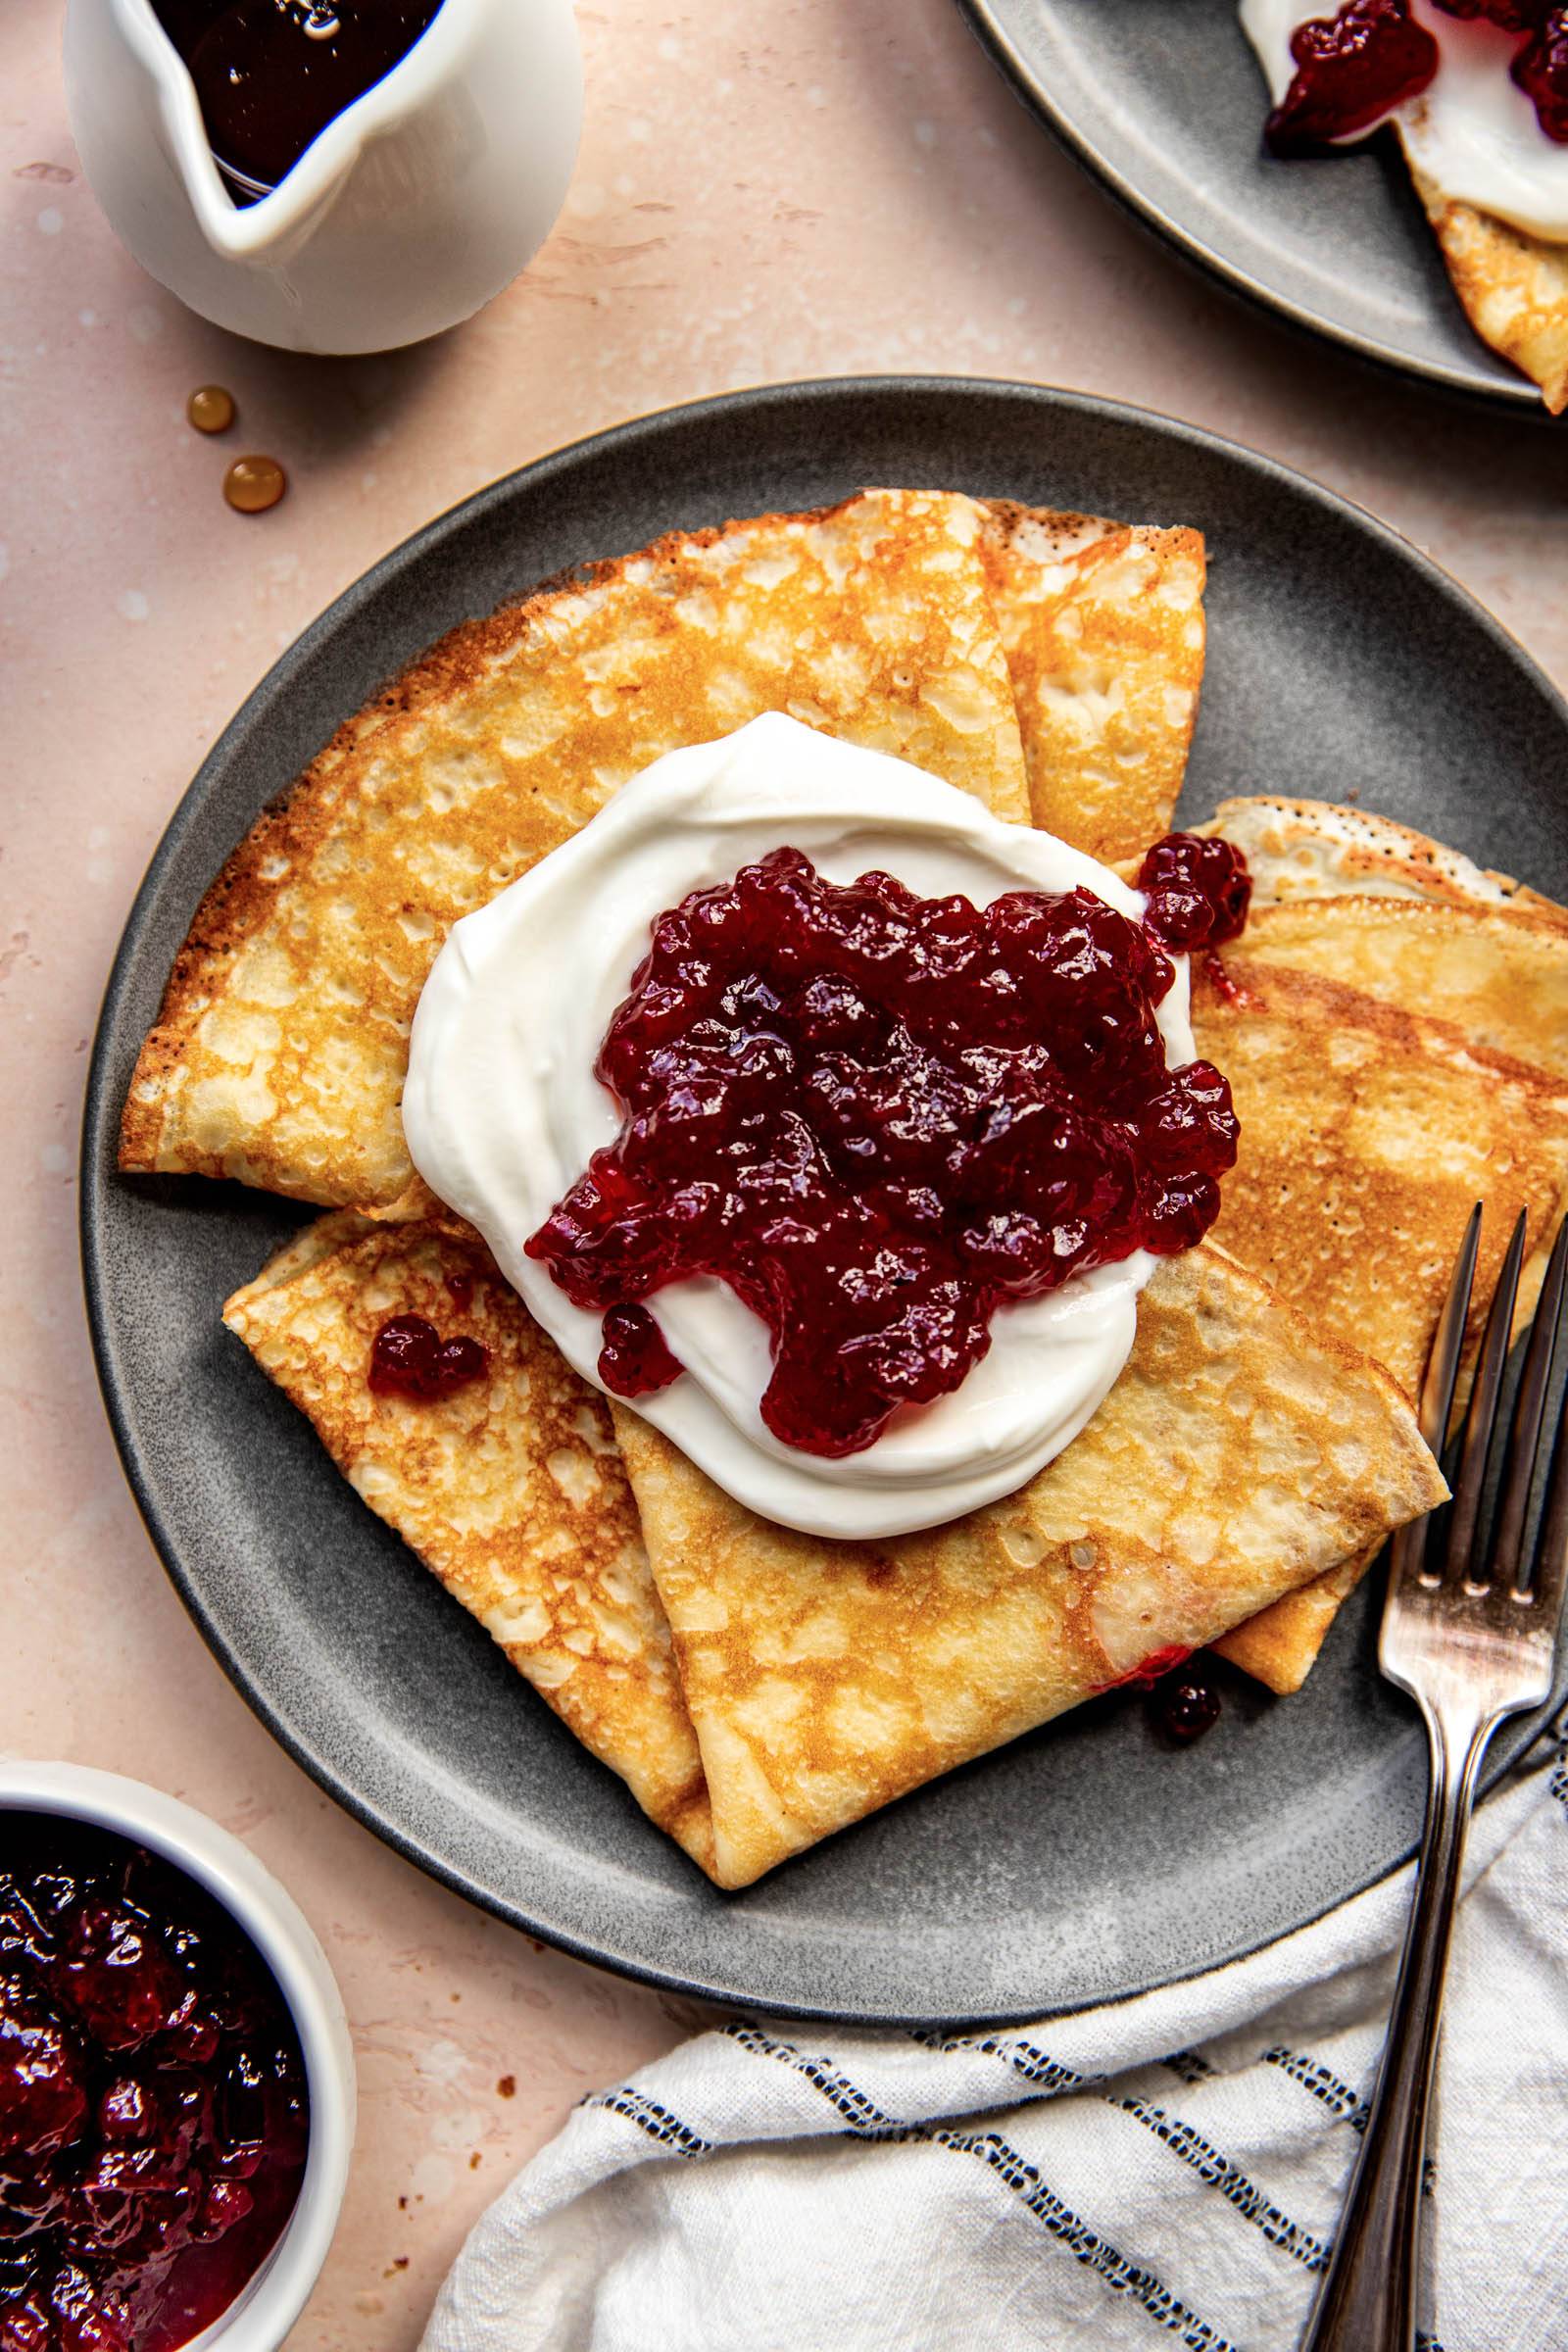 Swedish pancakes on a plate, topped with yogurt and jam.